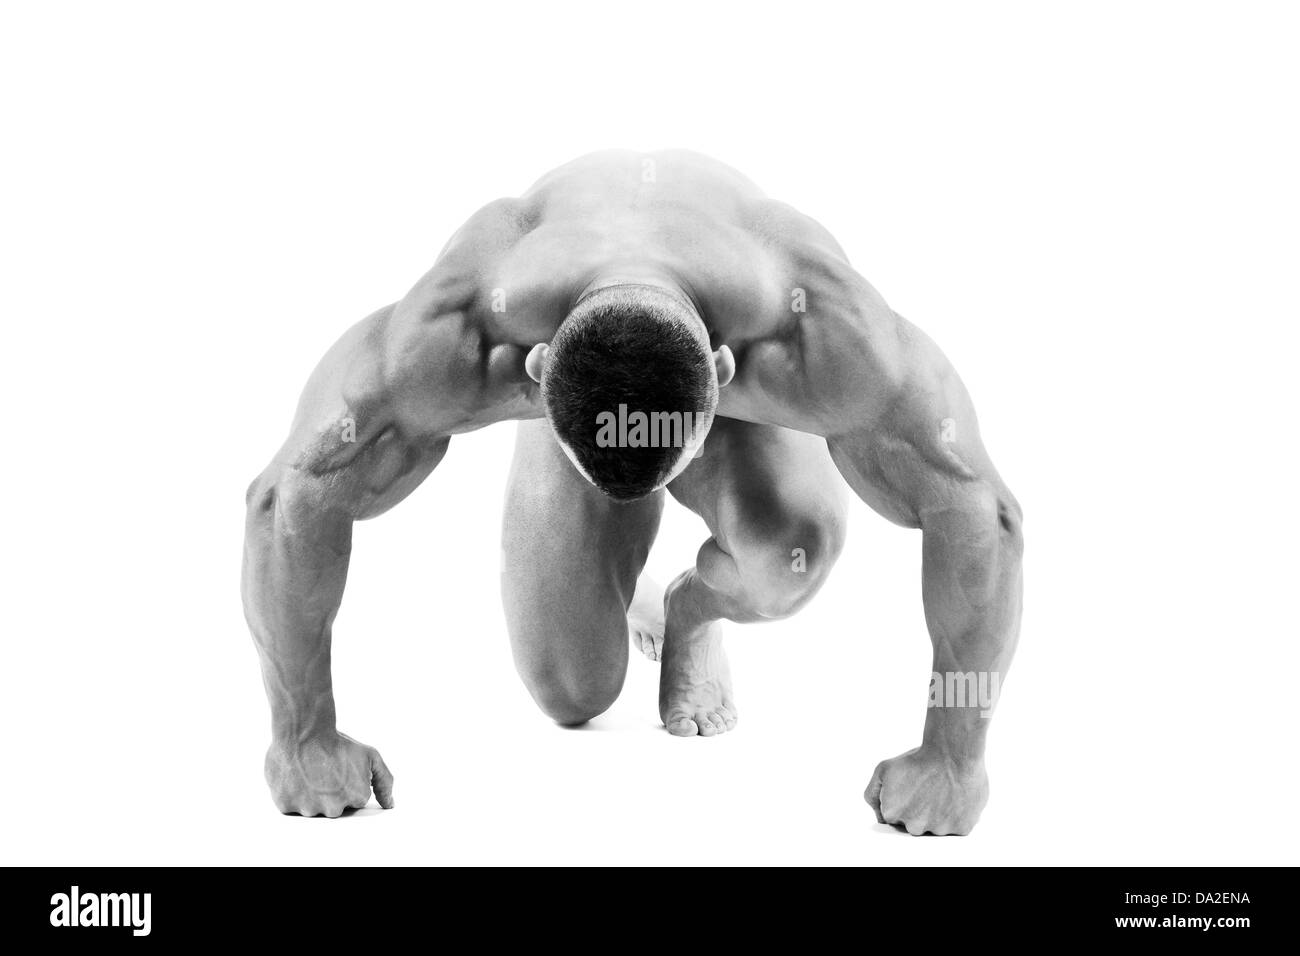 Bodybuilding Black And White Stock Photos Images Alamy Images, Photos, Reviews